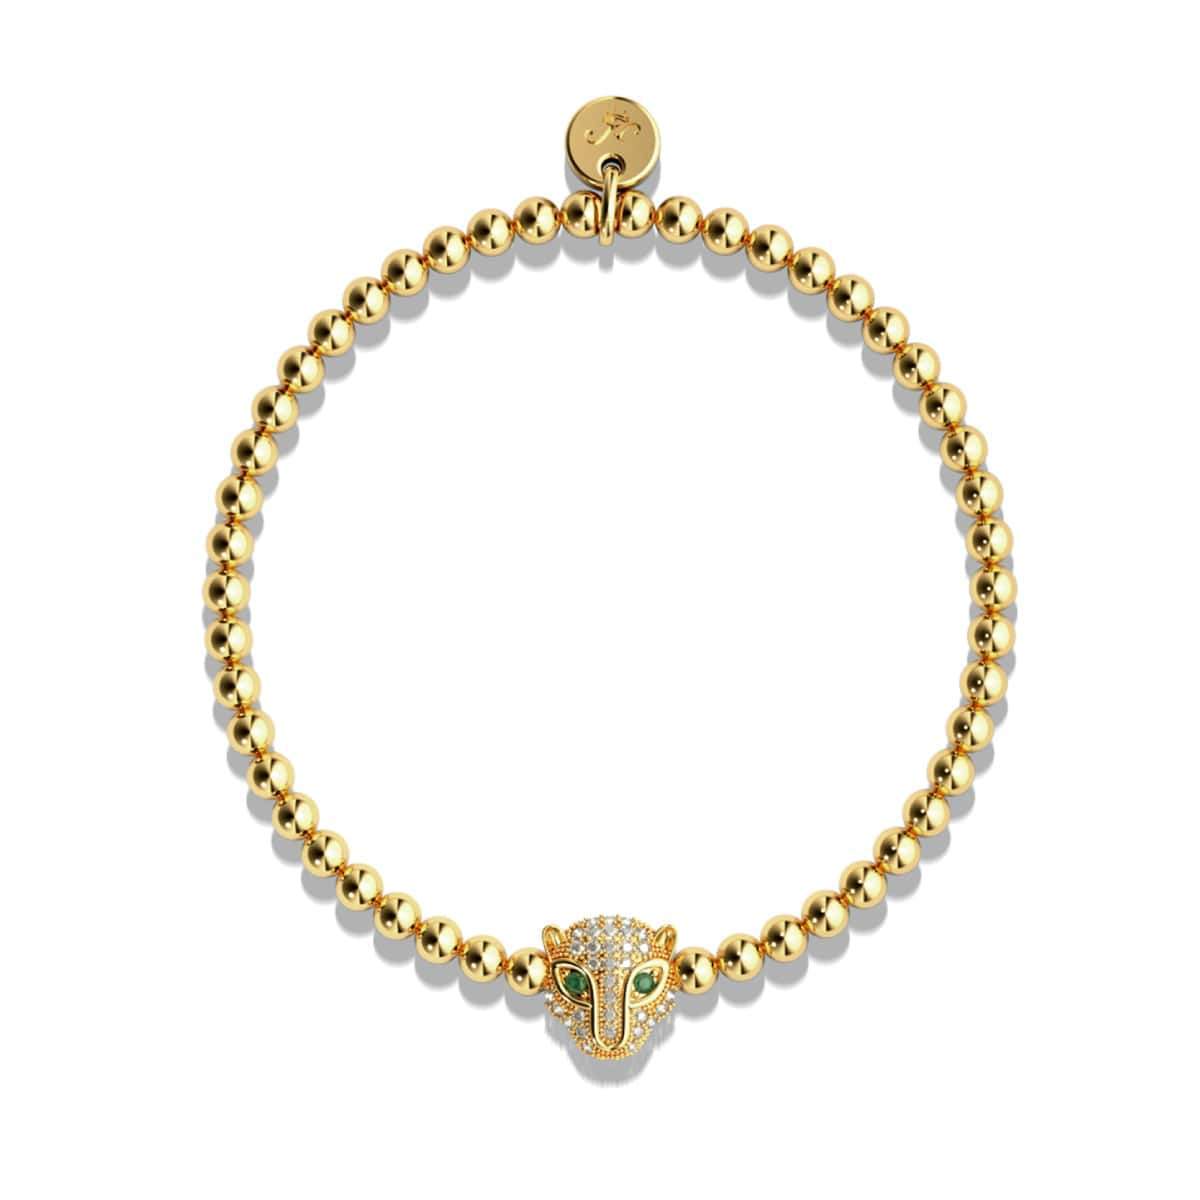 Tiffany & Co. Panther Link Bracelet in 14K Yellow Gold